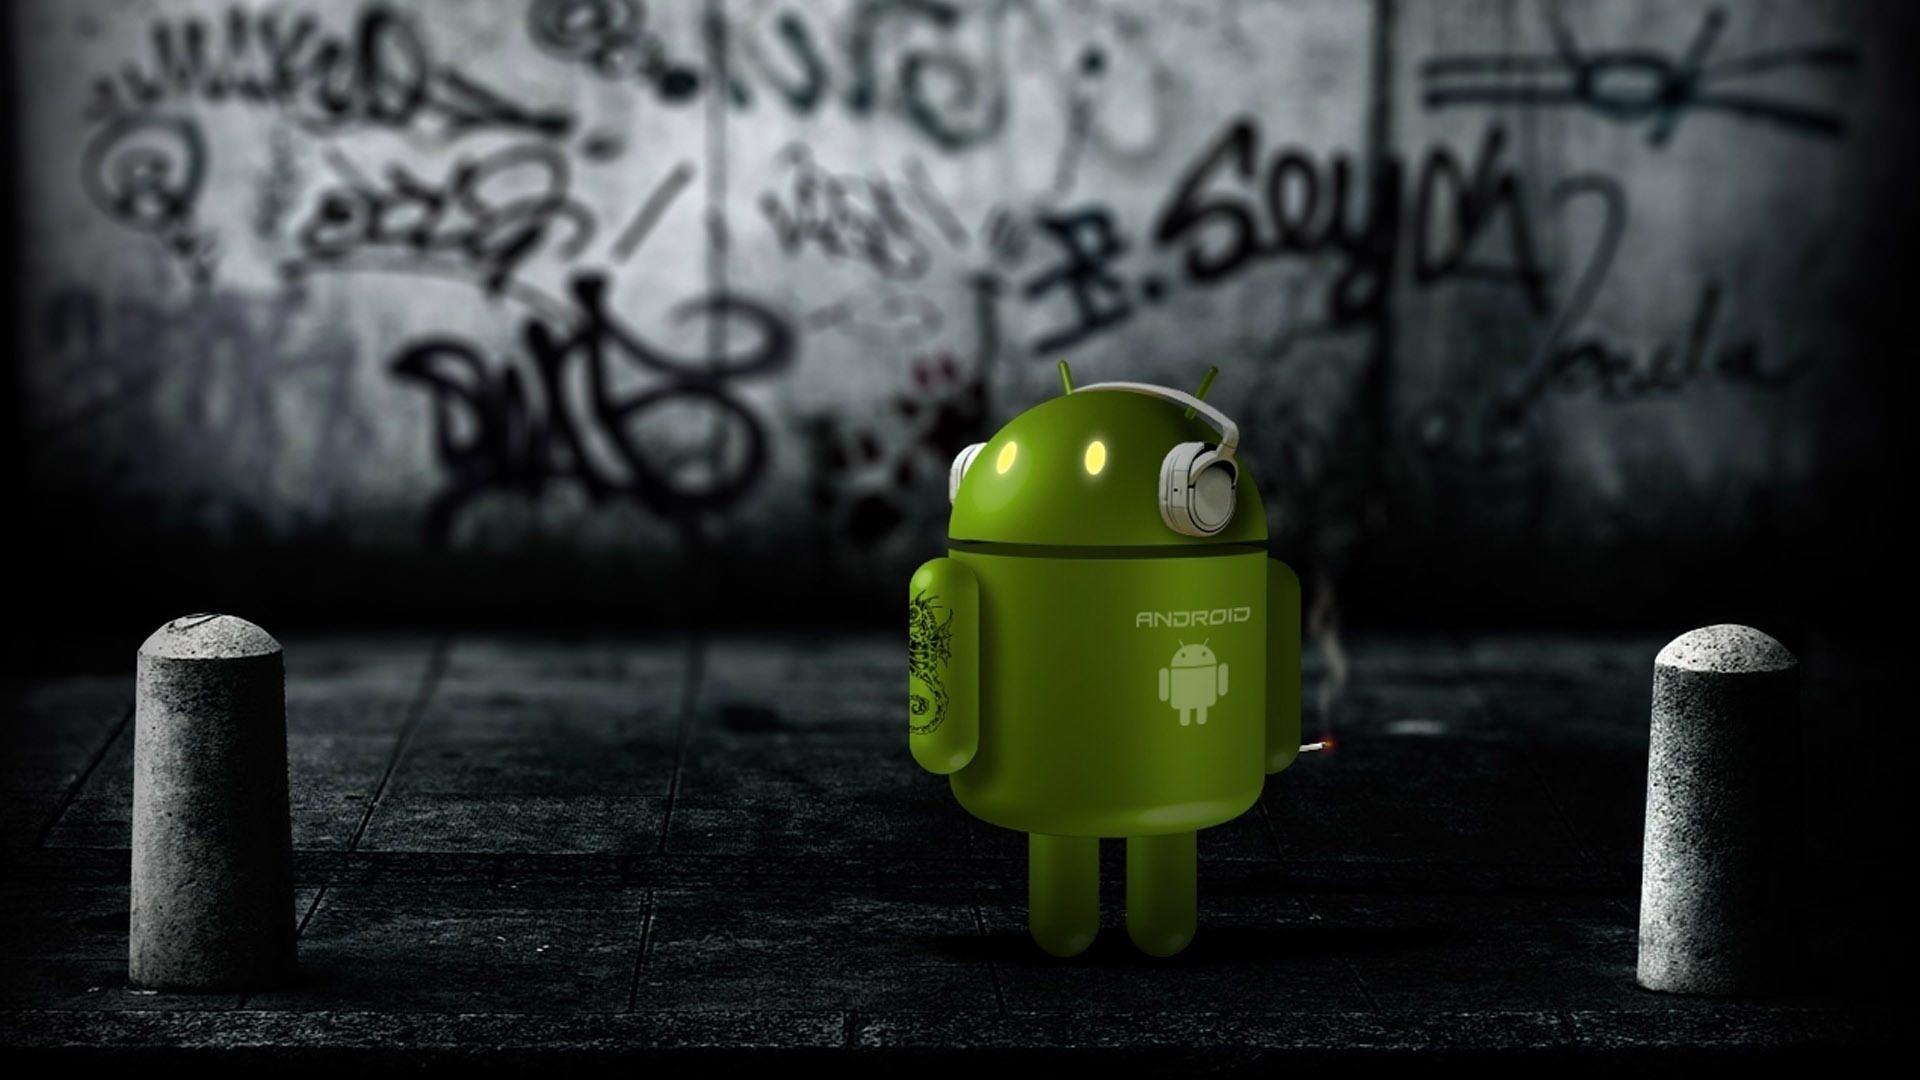 Android with glowing eyes HD wallpaper. HD Latest Wallpaper